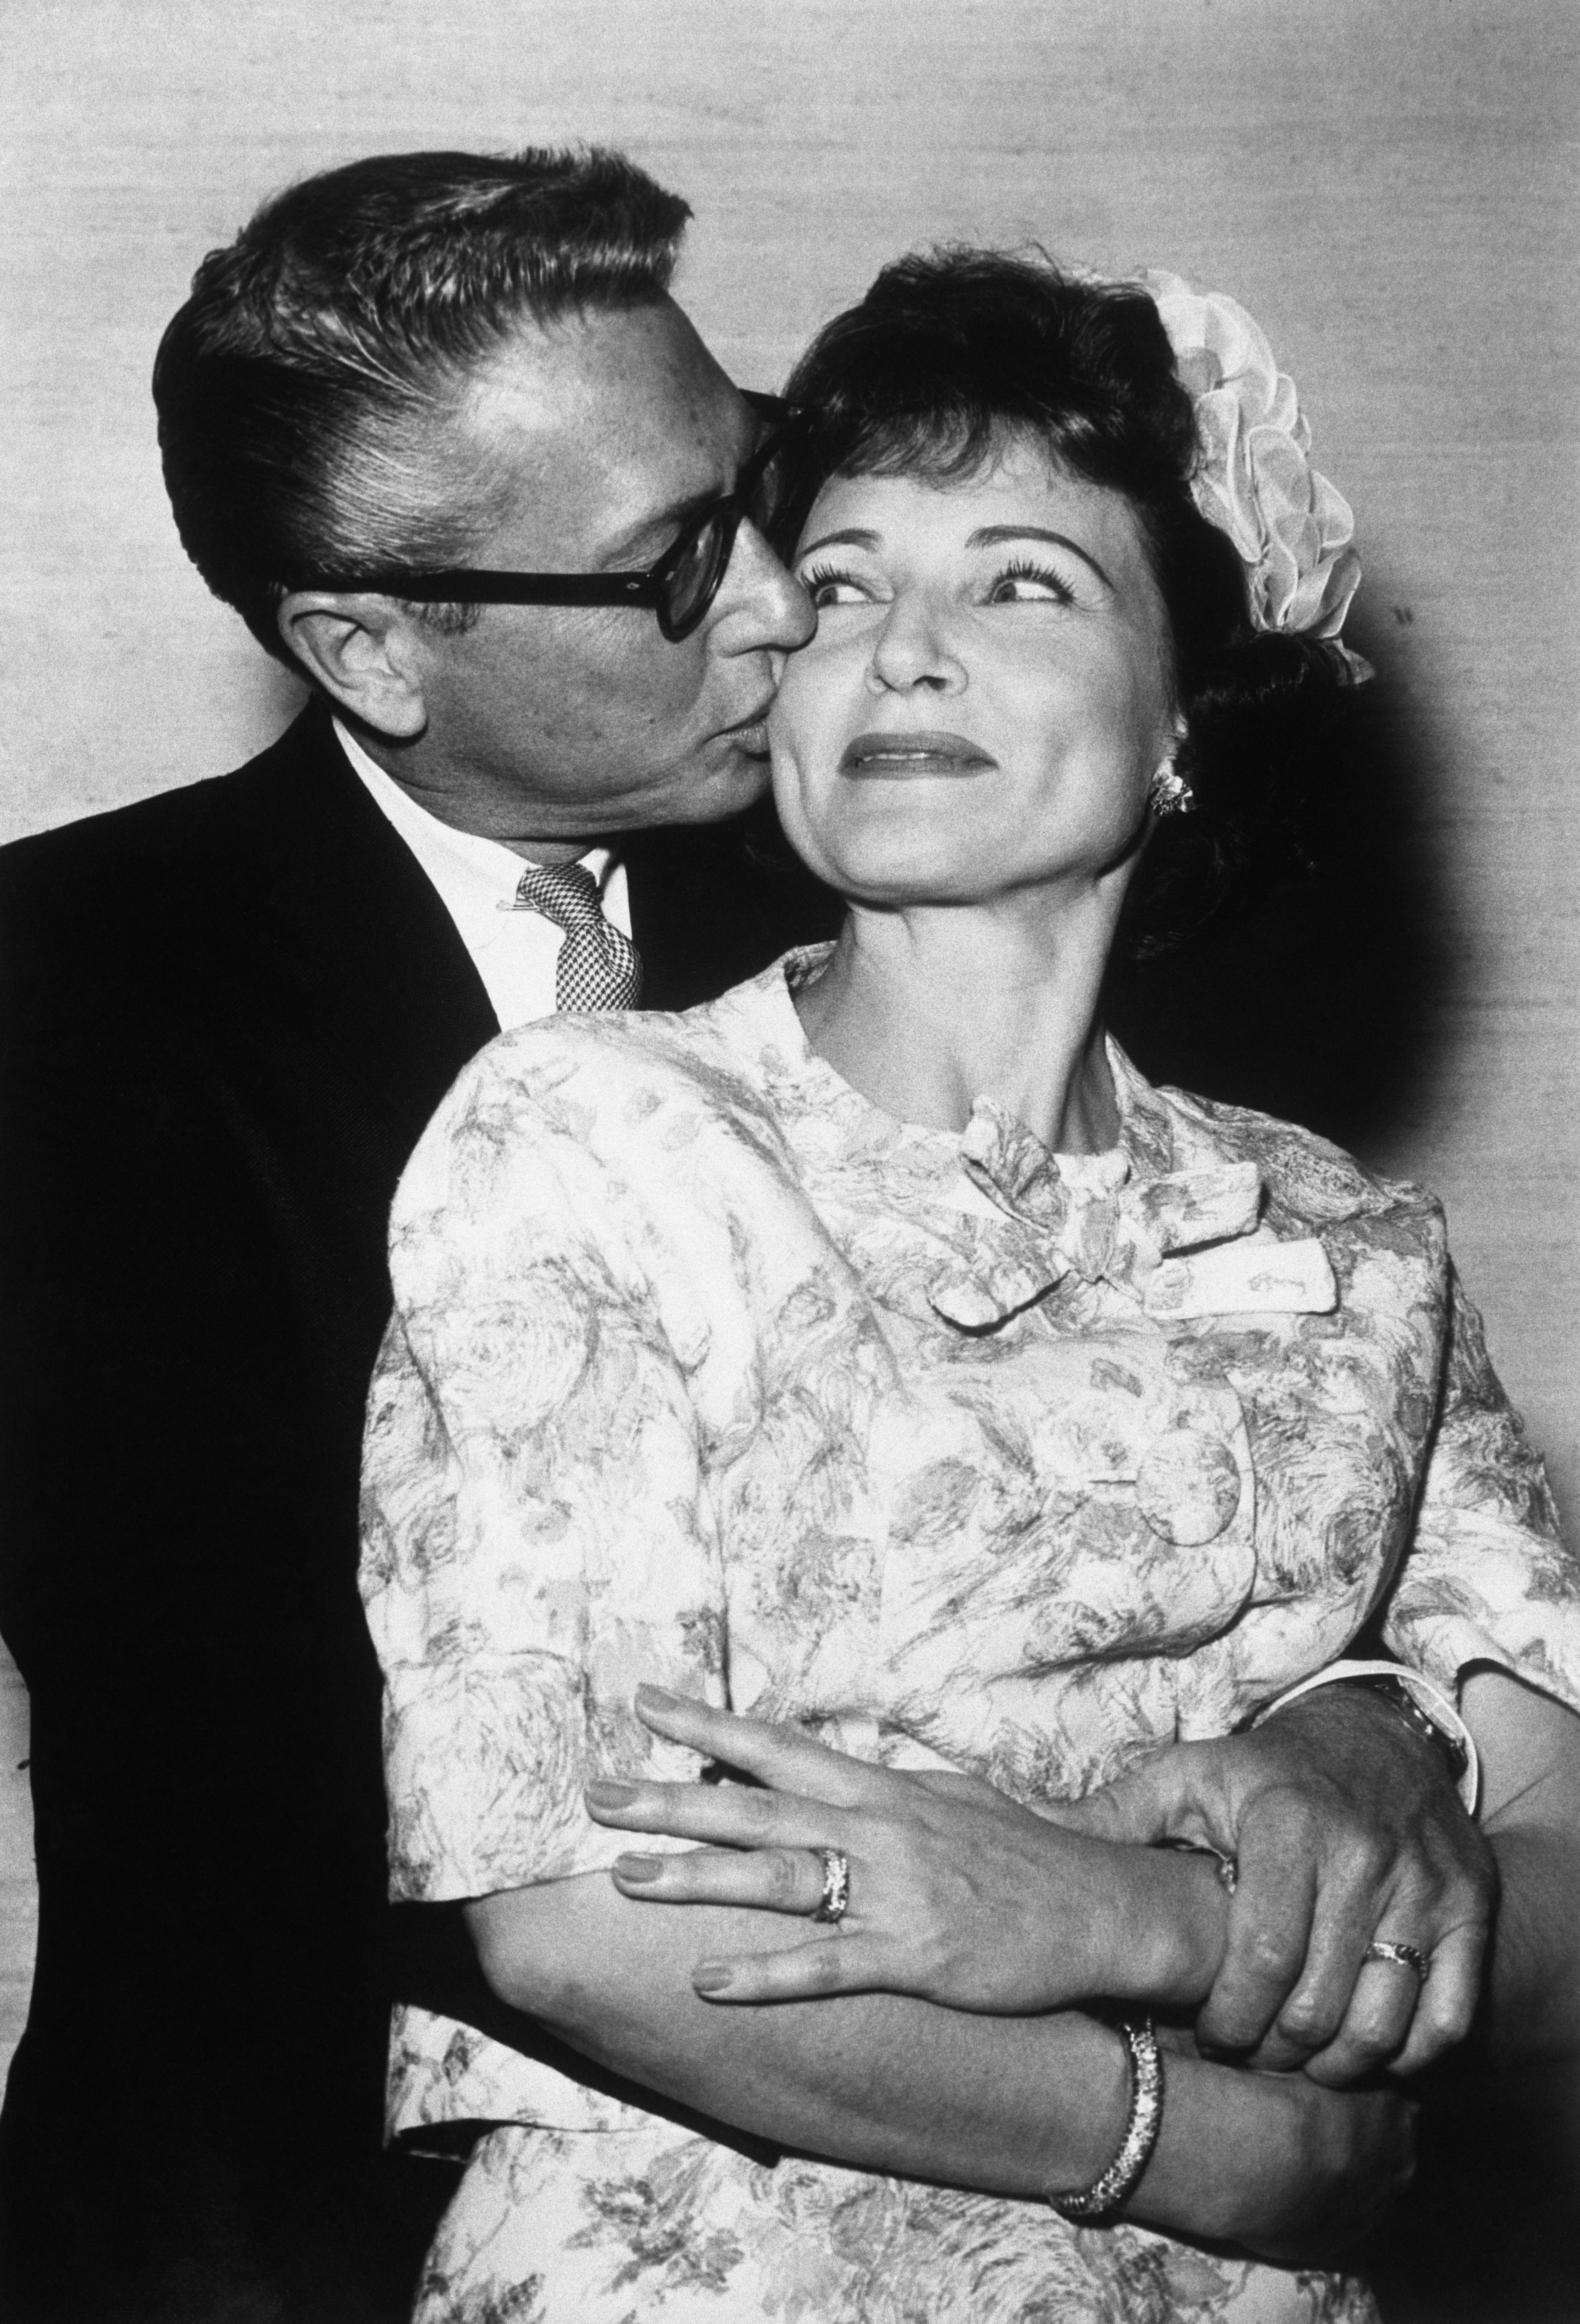 Betty White and Allen Ludden in Las Vegas in 1963. | Source: Getty images 